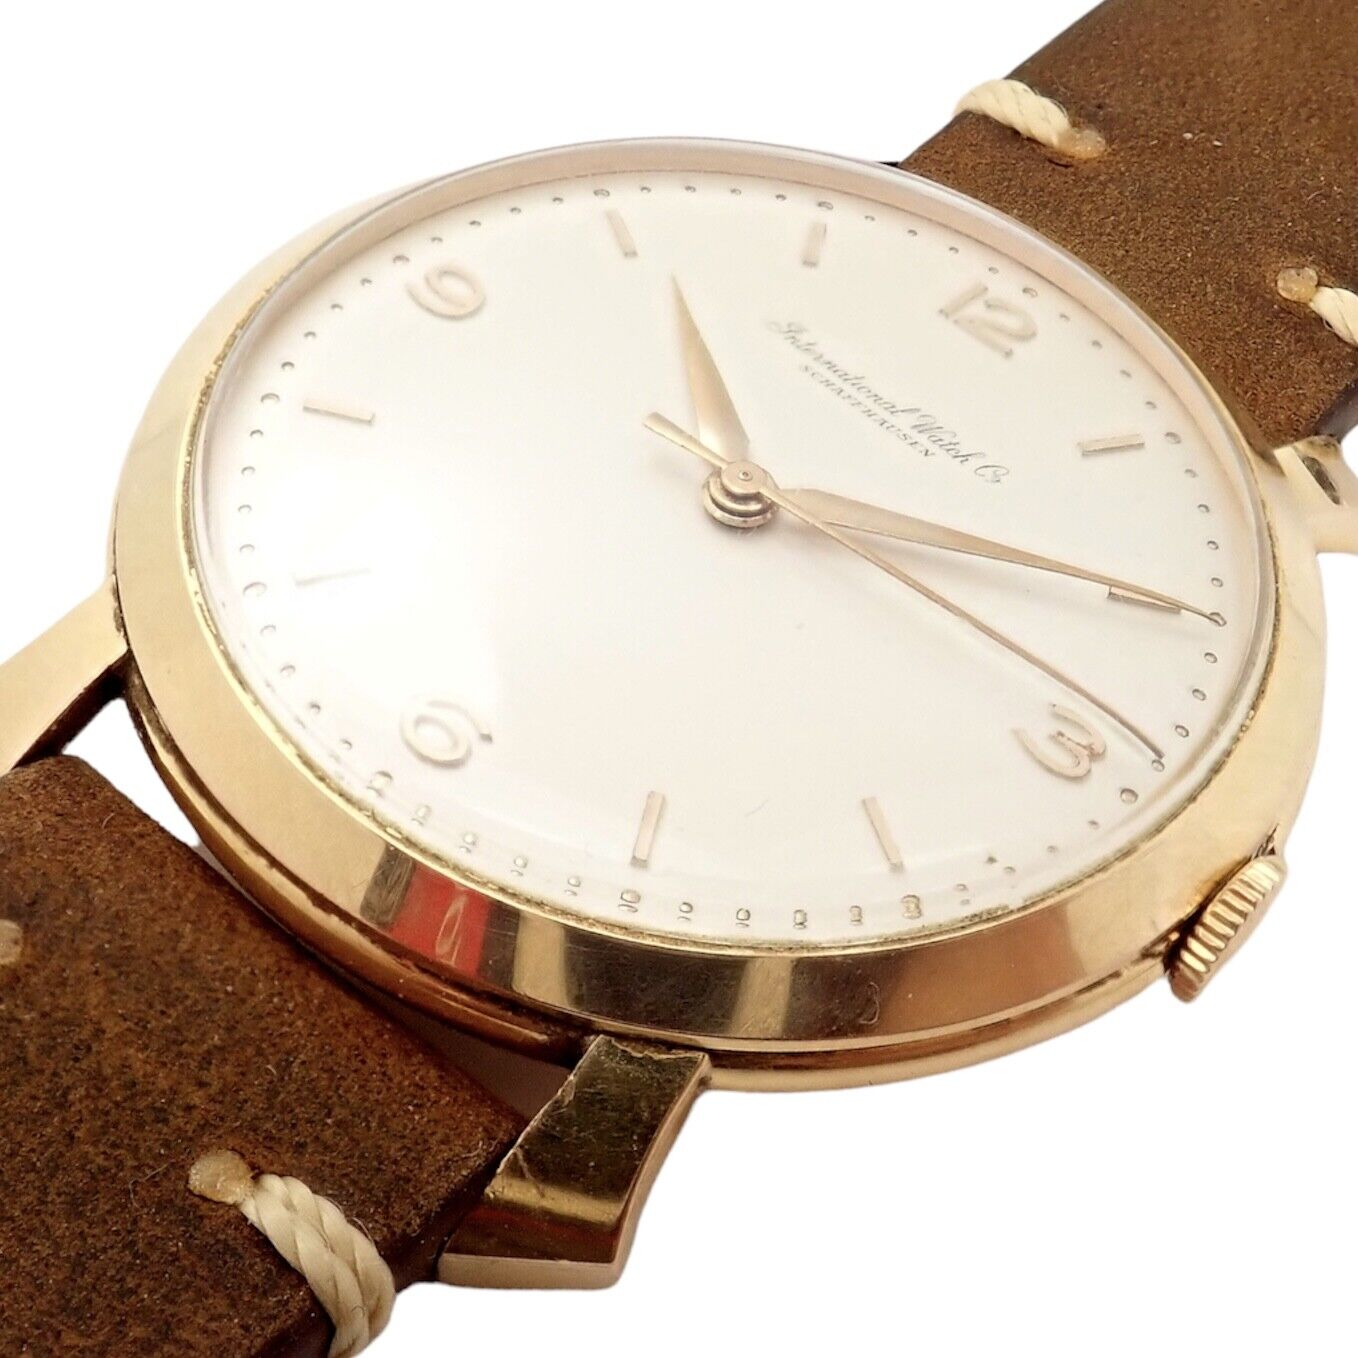 International Watch Co Jewelry & Watches:Watches, Parts & Accessories:Watches:Wristwatches Authentic! IWC Schaffhausen International Watch Co 18k Yellow Gold Manual Watch